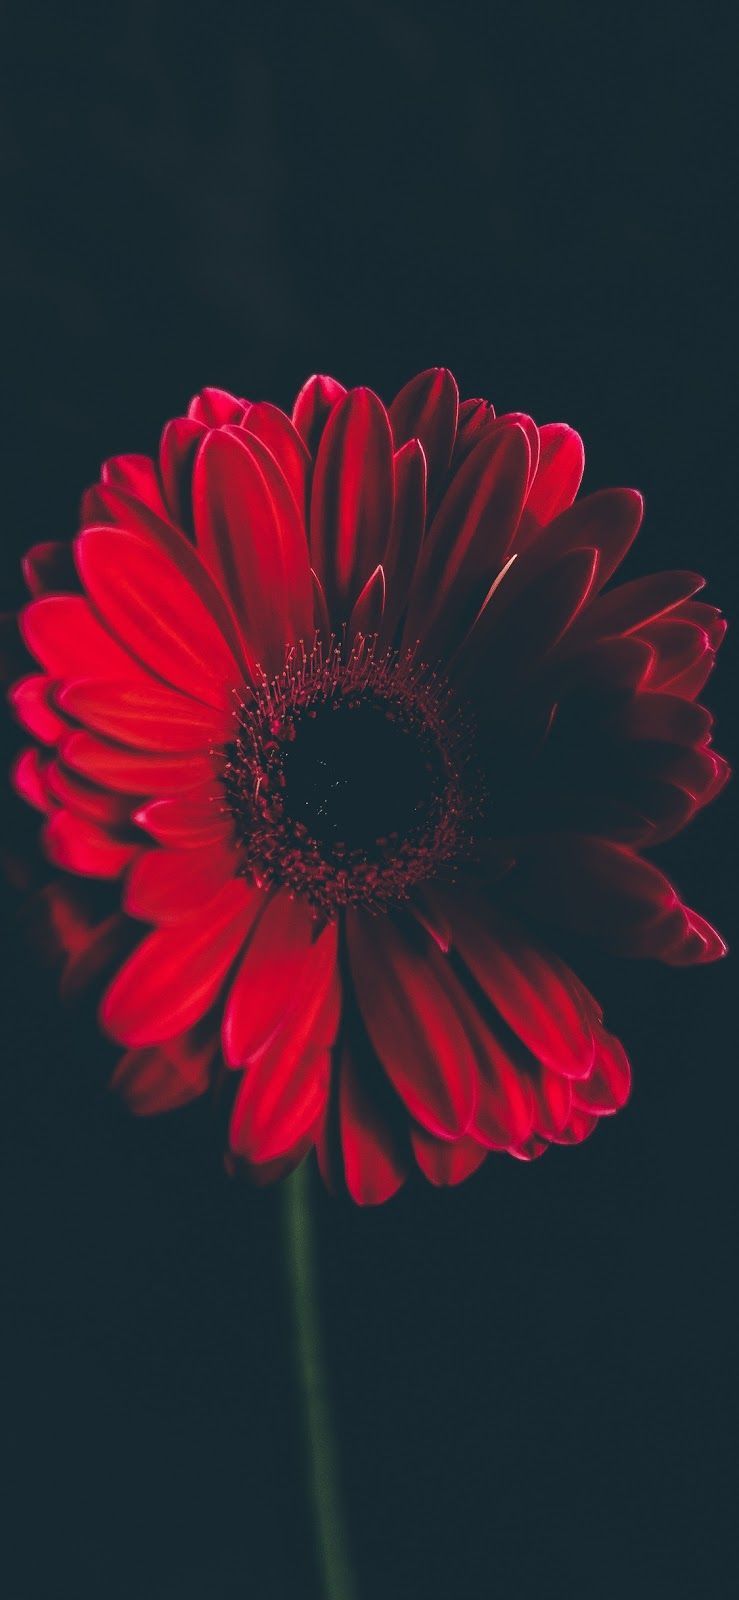 Cute Red Flower Wallpapers on WallpaperDog